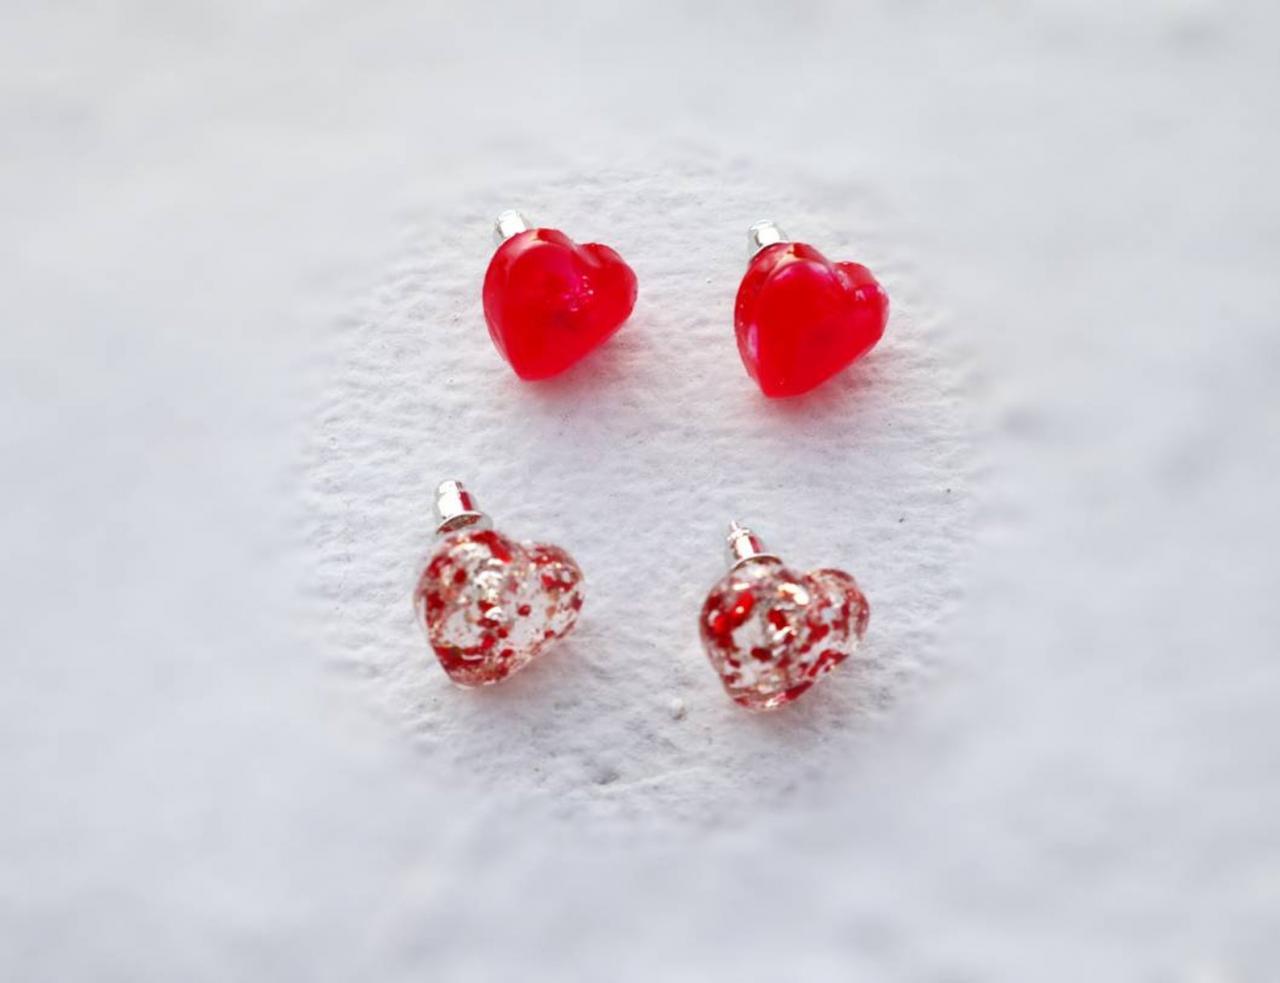 Heart Resin Studs Earrings, Personalized Stud Earrings, Gift For Her, Customized Jewelry, Resin Earrings, Stud Women Earrings, Heart Shaped